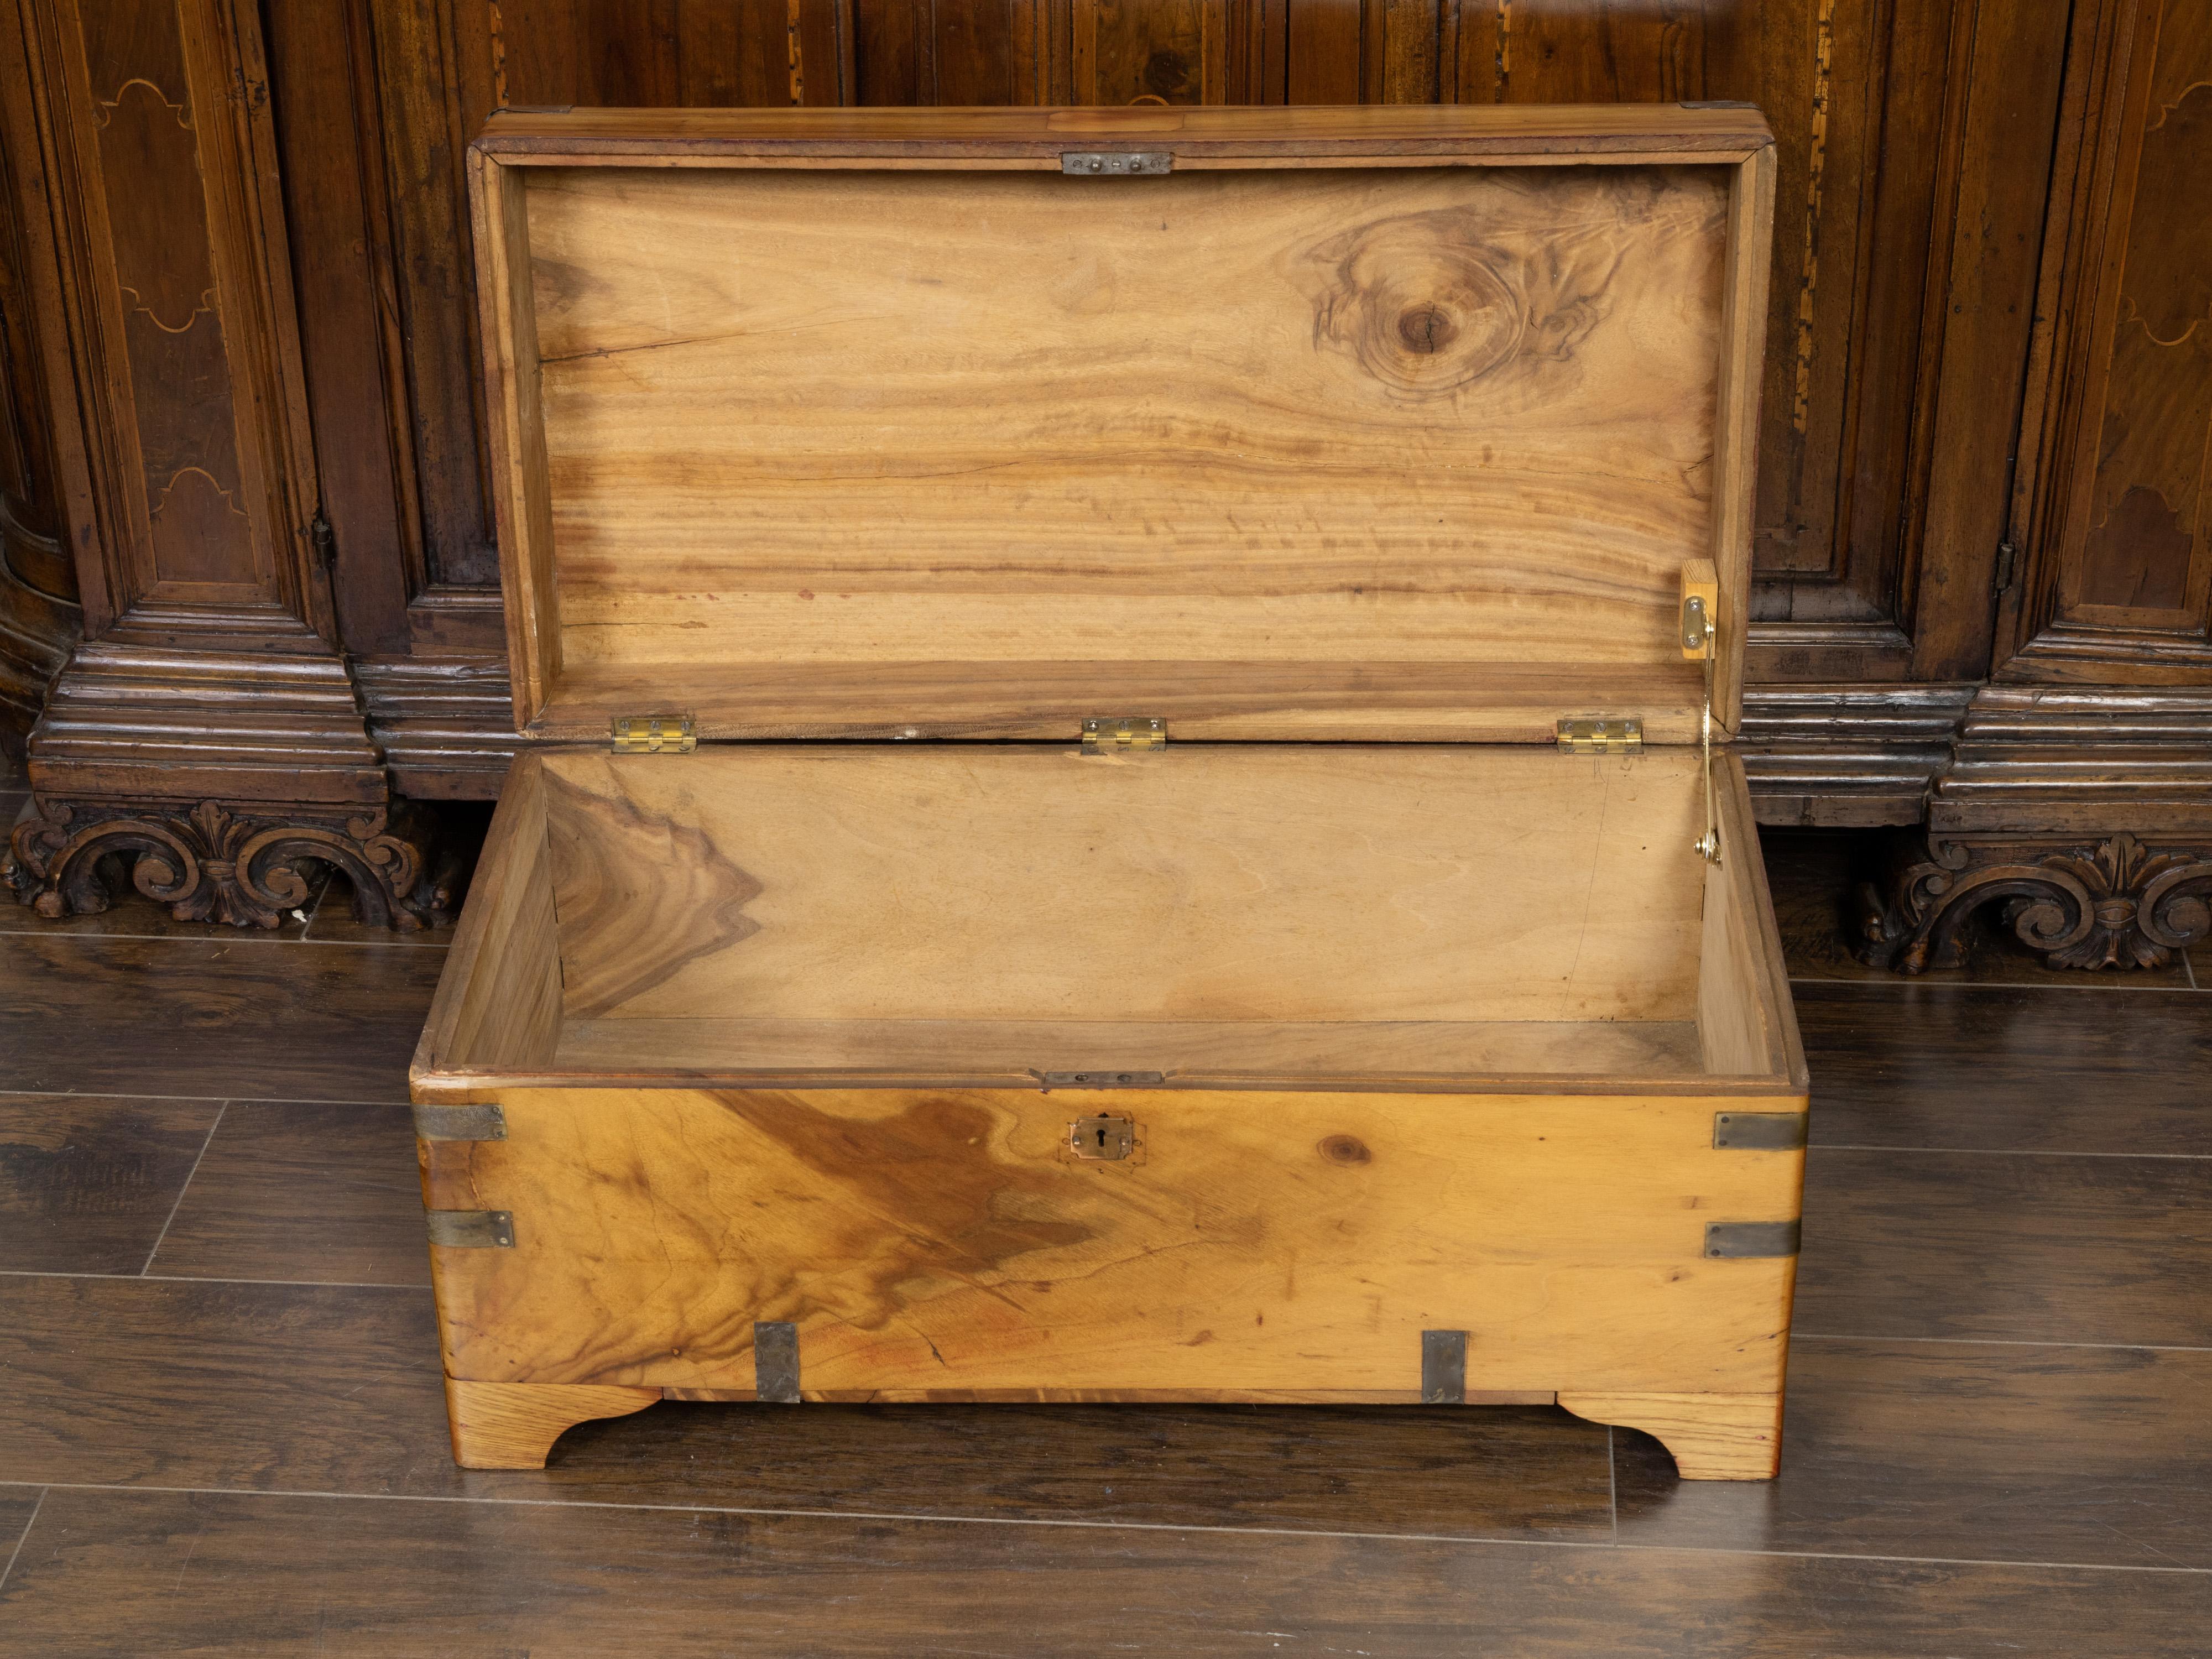 An English camphor wood trunk from the late 19th century with brass accents. Created in the last decade of the 19th century, this English camphor wood trunk presents an elegant linear silhouette, beautifully accented with brass details. The